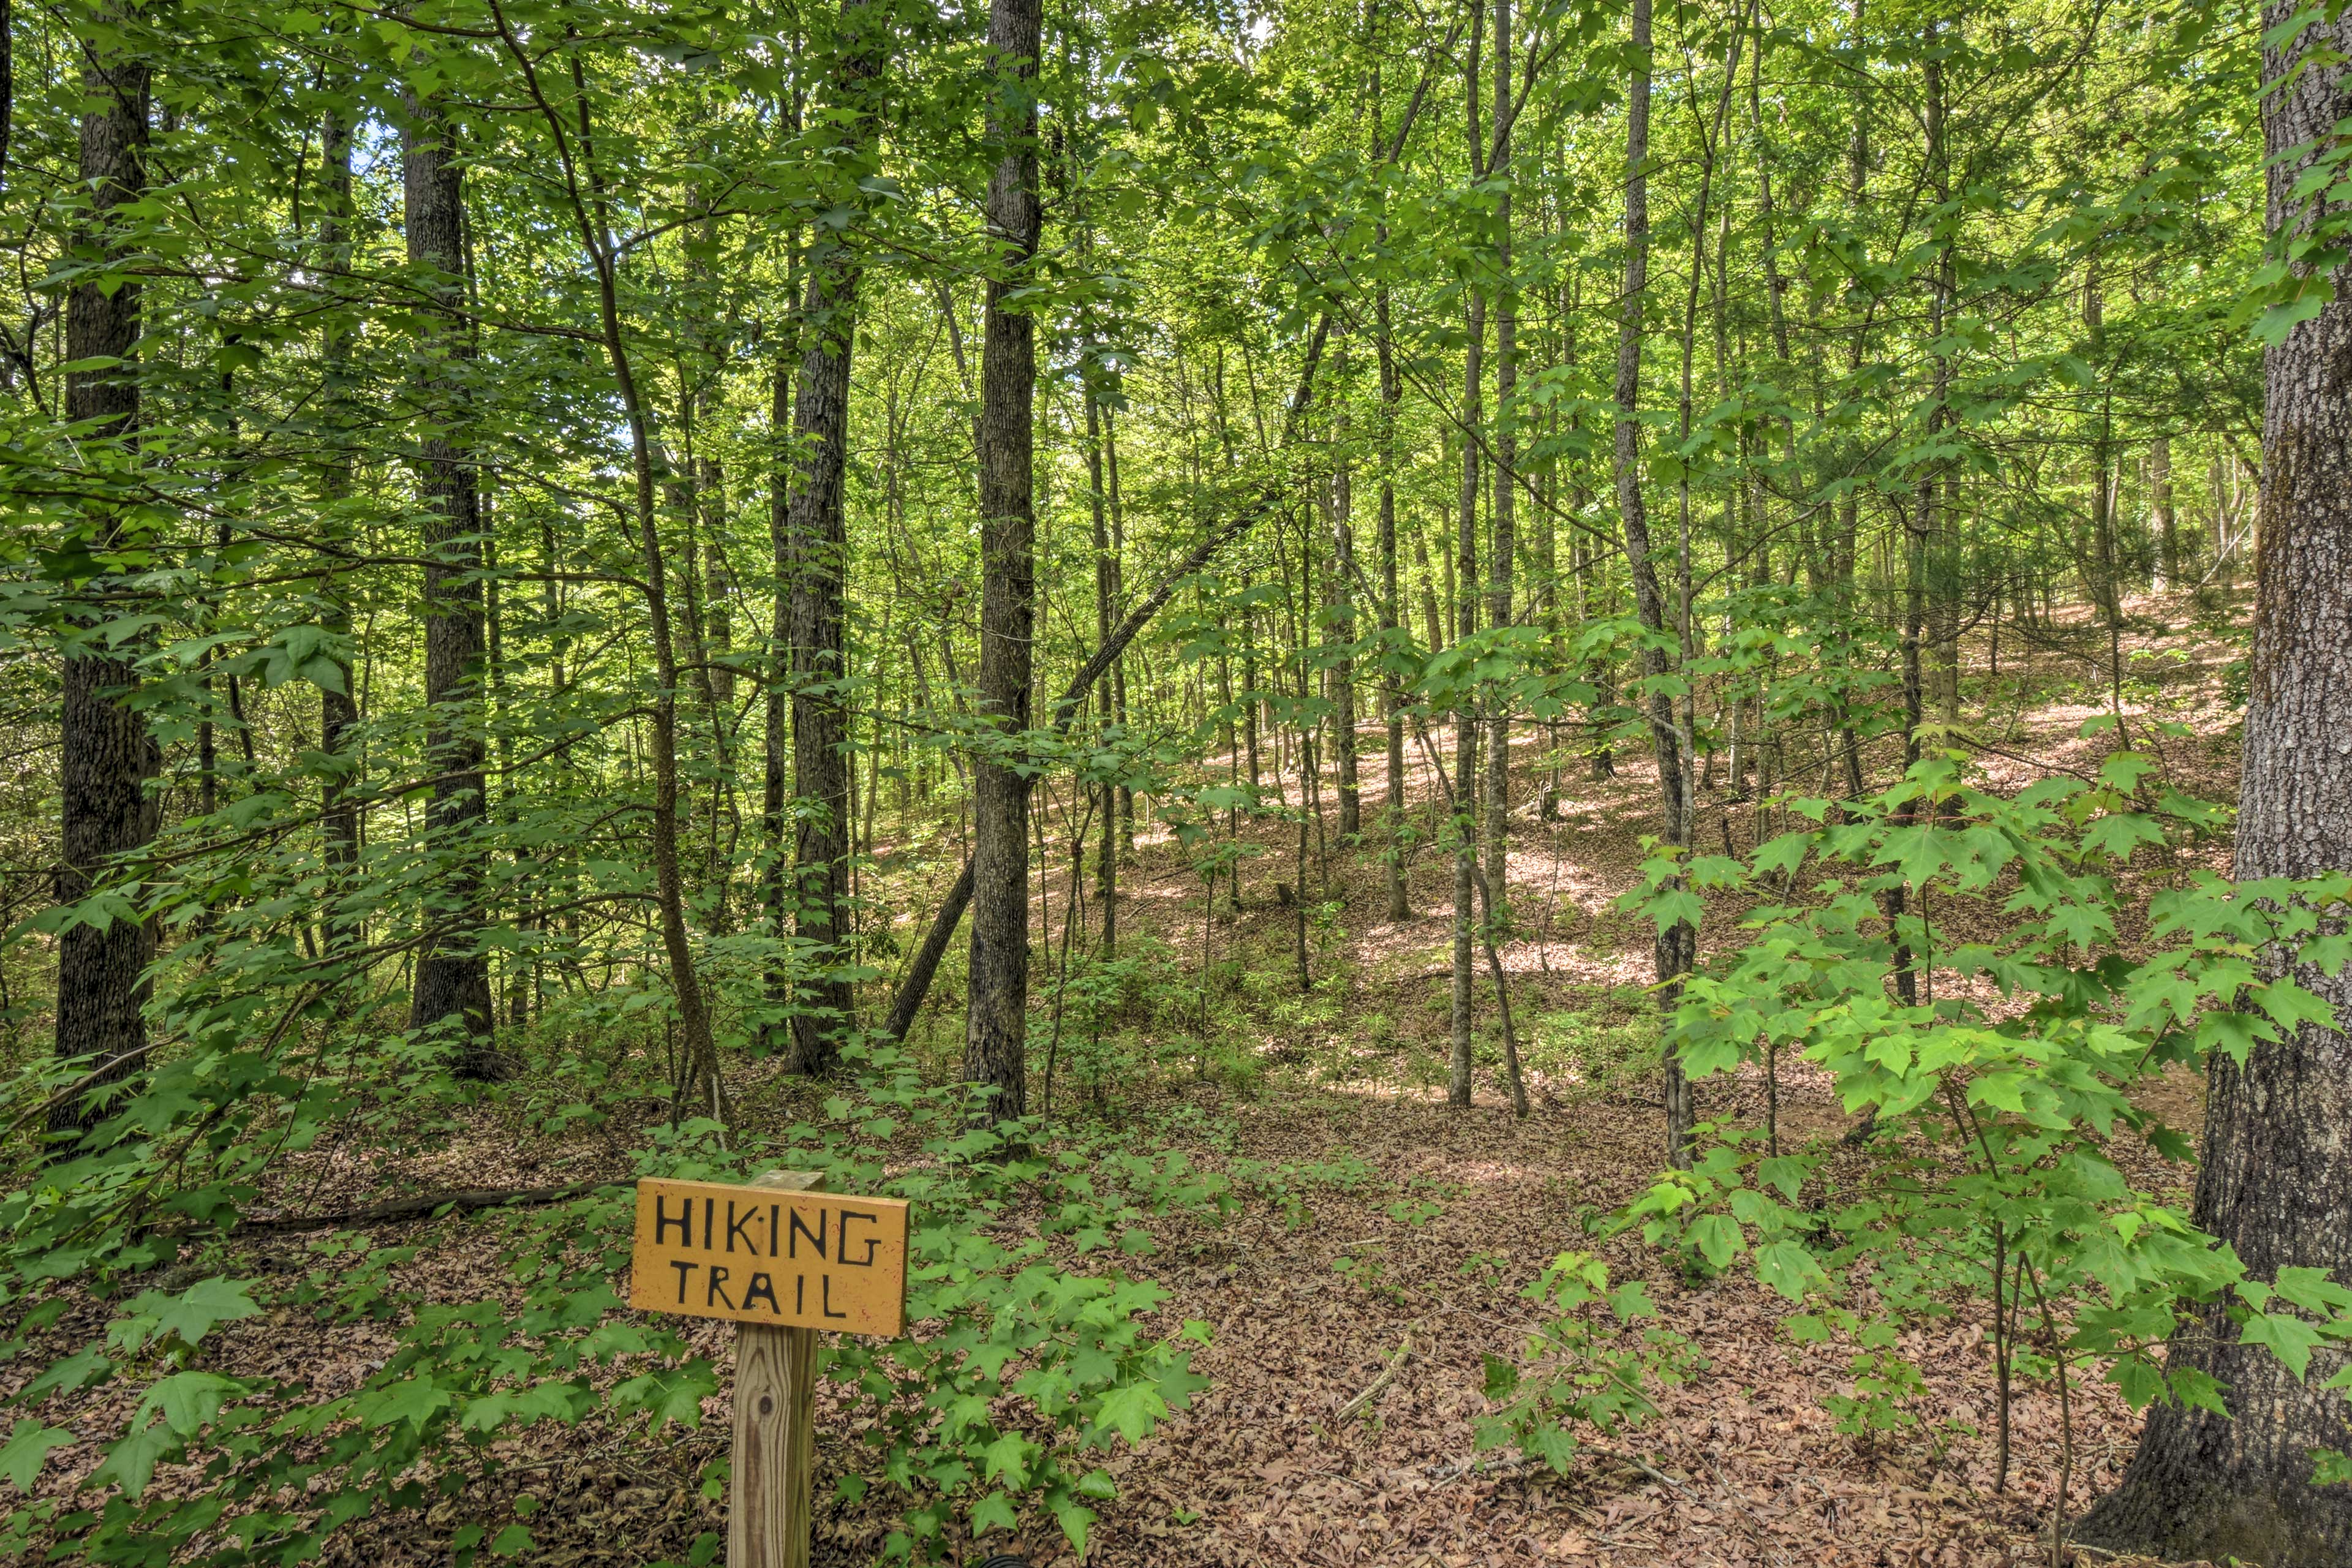 Hiking Trails On-Site